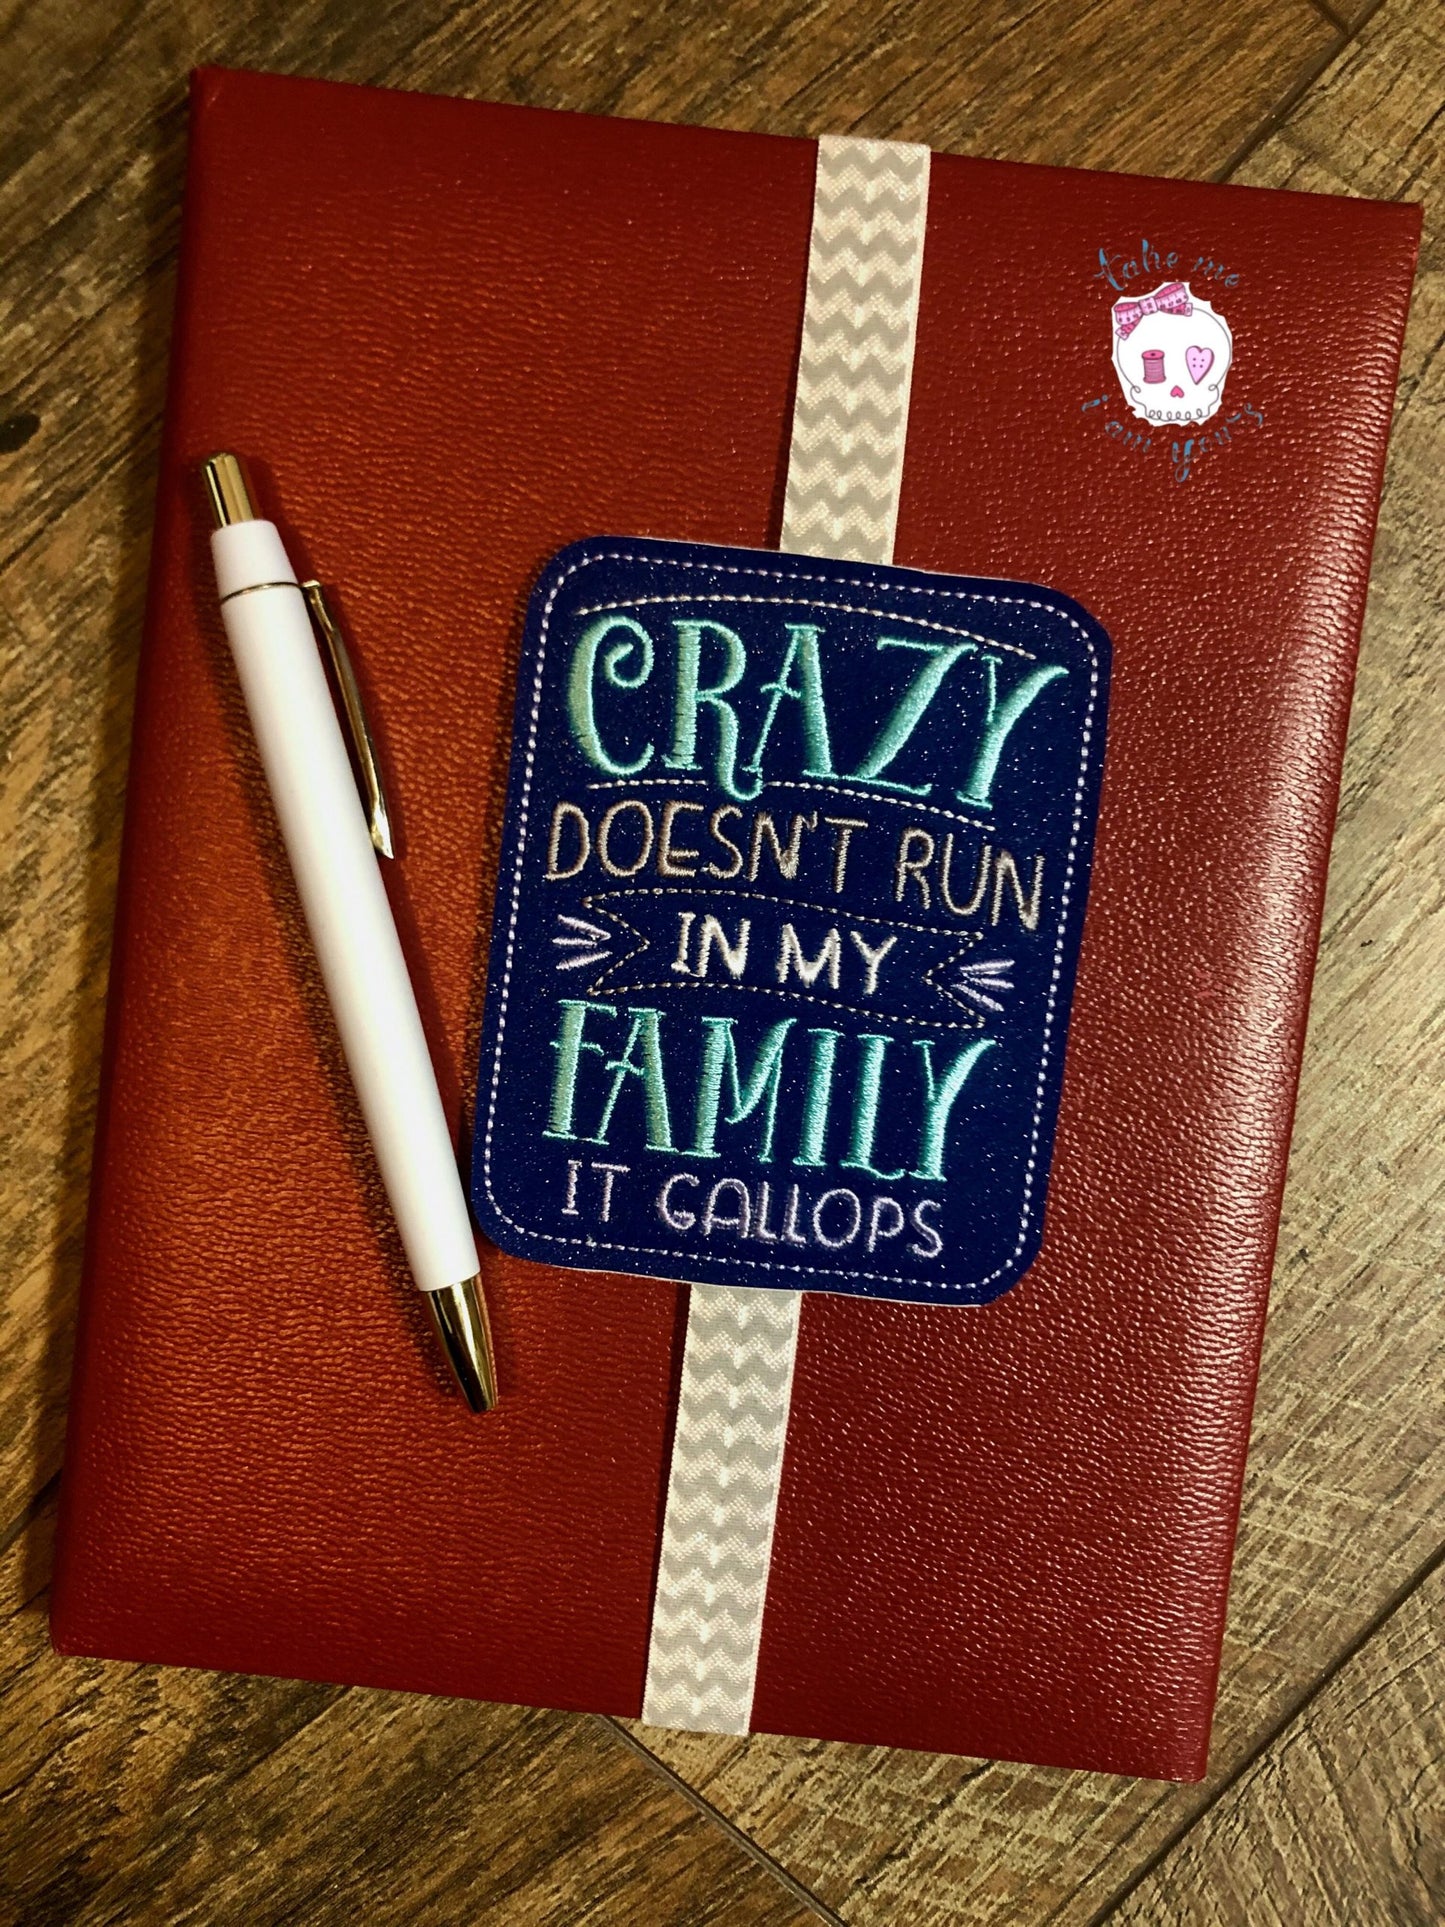 Crazy Family Book Band - Embroidery Design, Digital File